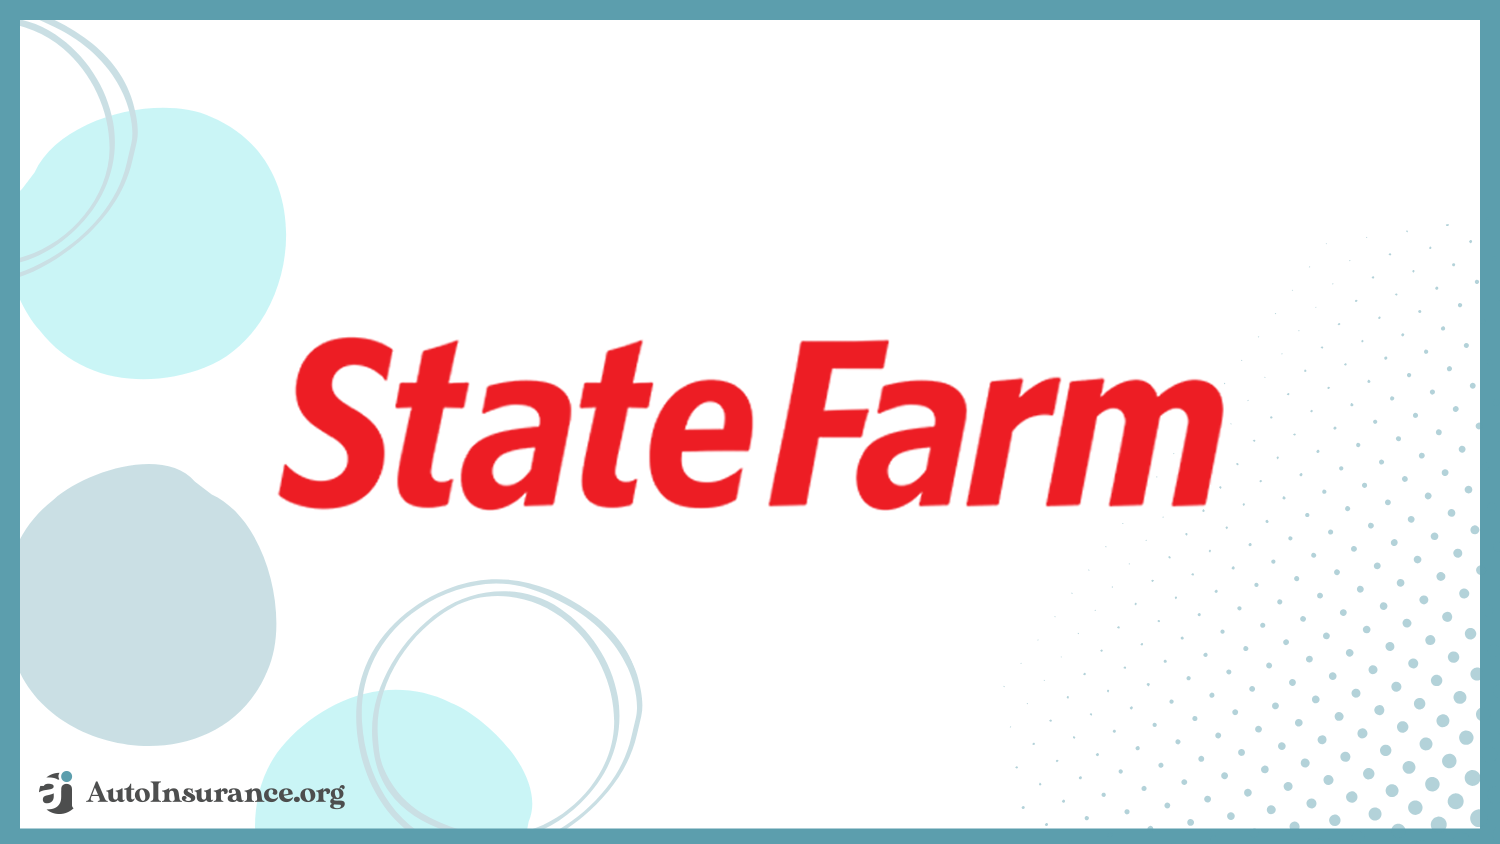 State Farm: cheap auto insurance for low-income families